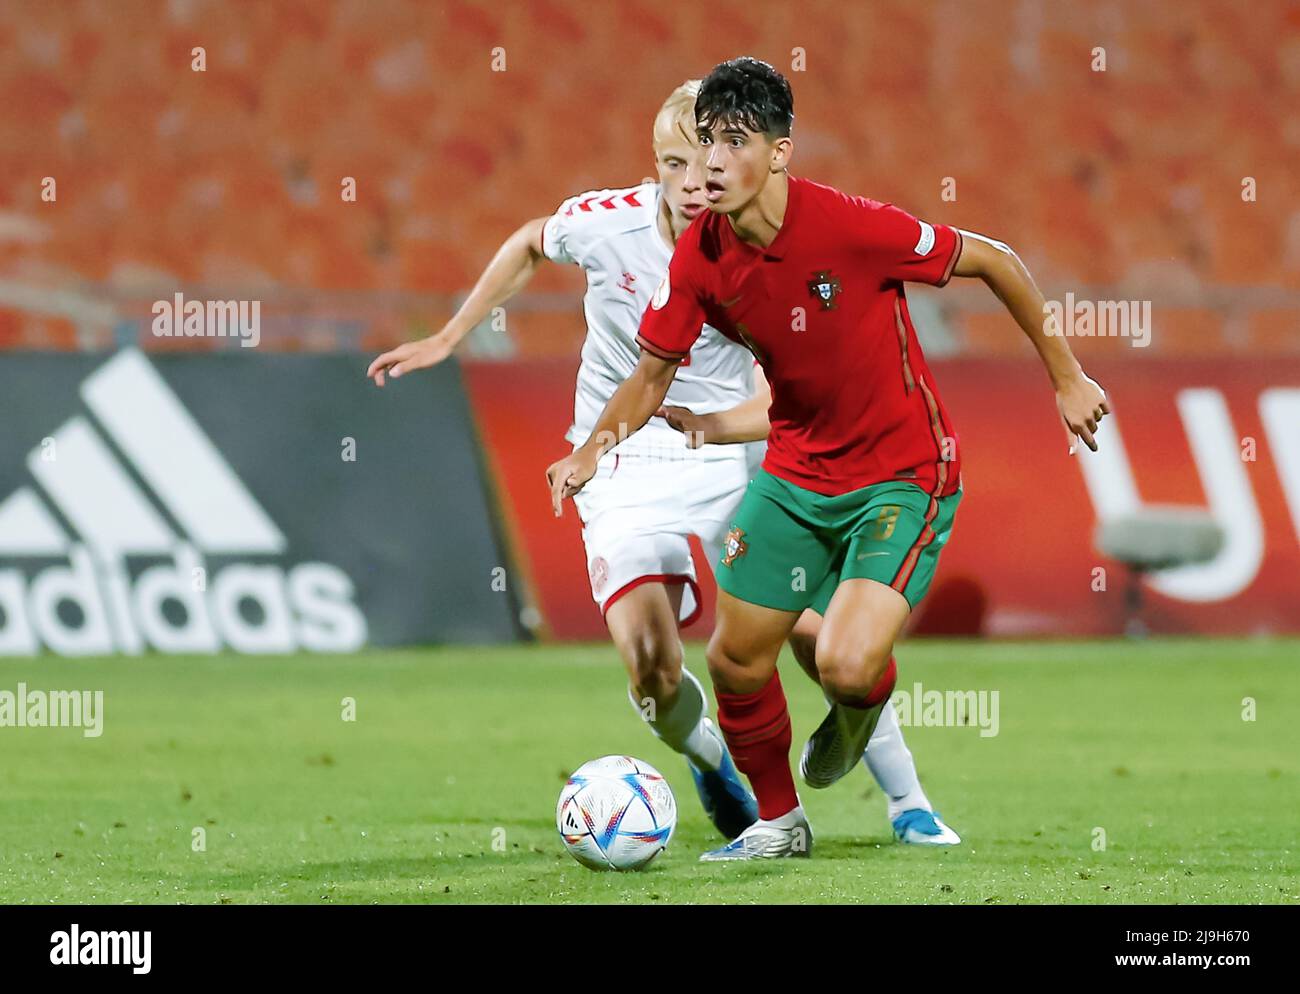 Tel Aviv, Israel. 23rd May, 2022. João Miguel Fins Veloso (8 Portugal) controls the ball (action) during the UEFA Under 17 European Championship 2022 football match between Portugal and Denmark at Ramat-Gan-Stadium in Tel Aviv, Israel. Alan Shiver/SPP Credit: SPP Sport Press Photo. /Alamy Live News Stock Photo